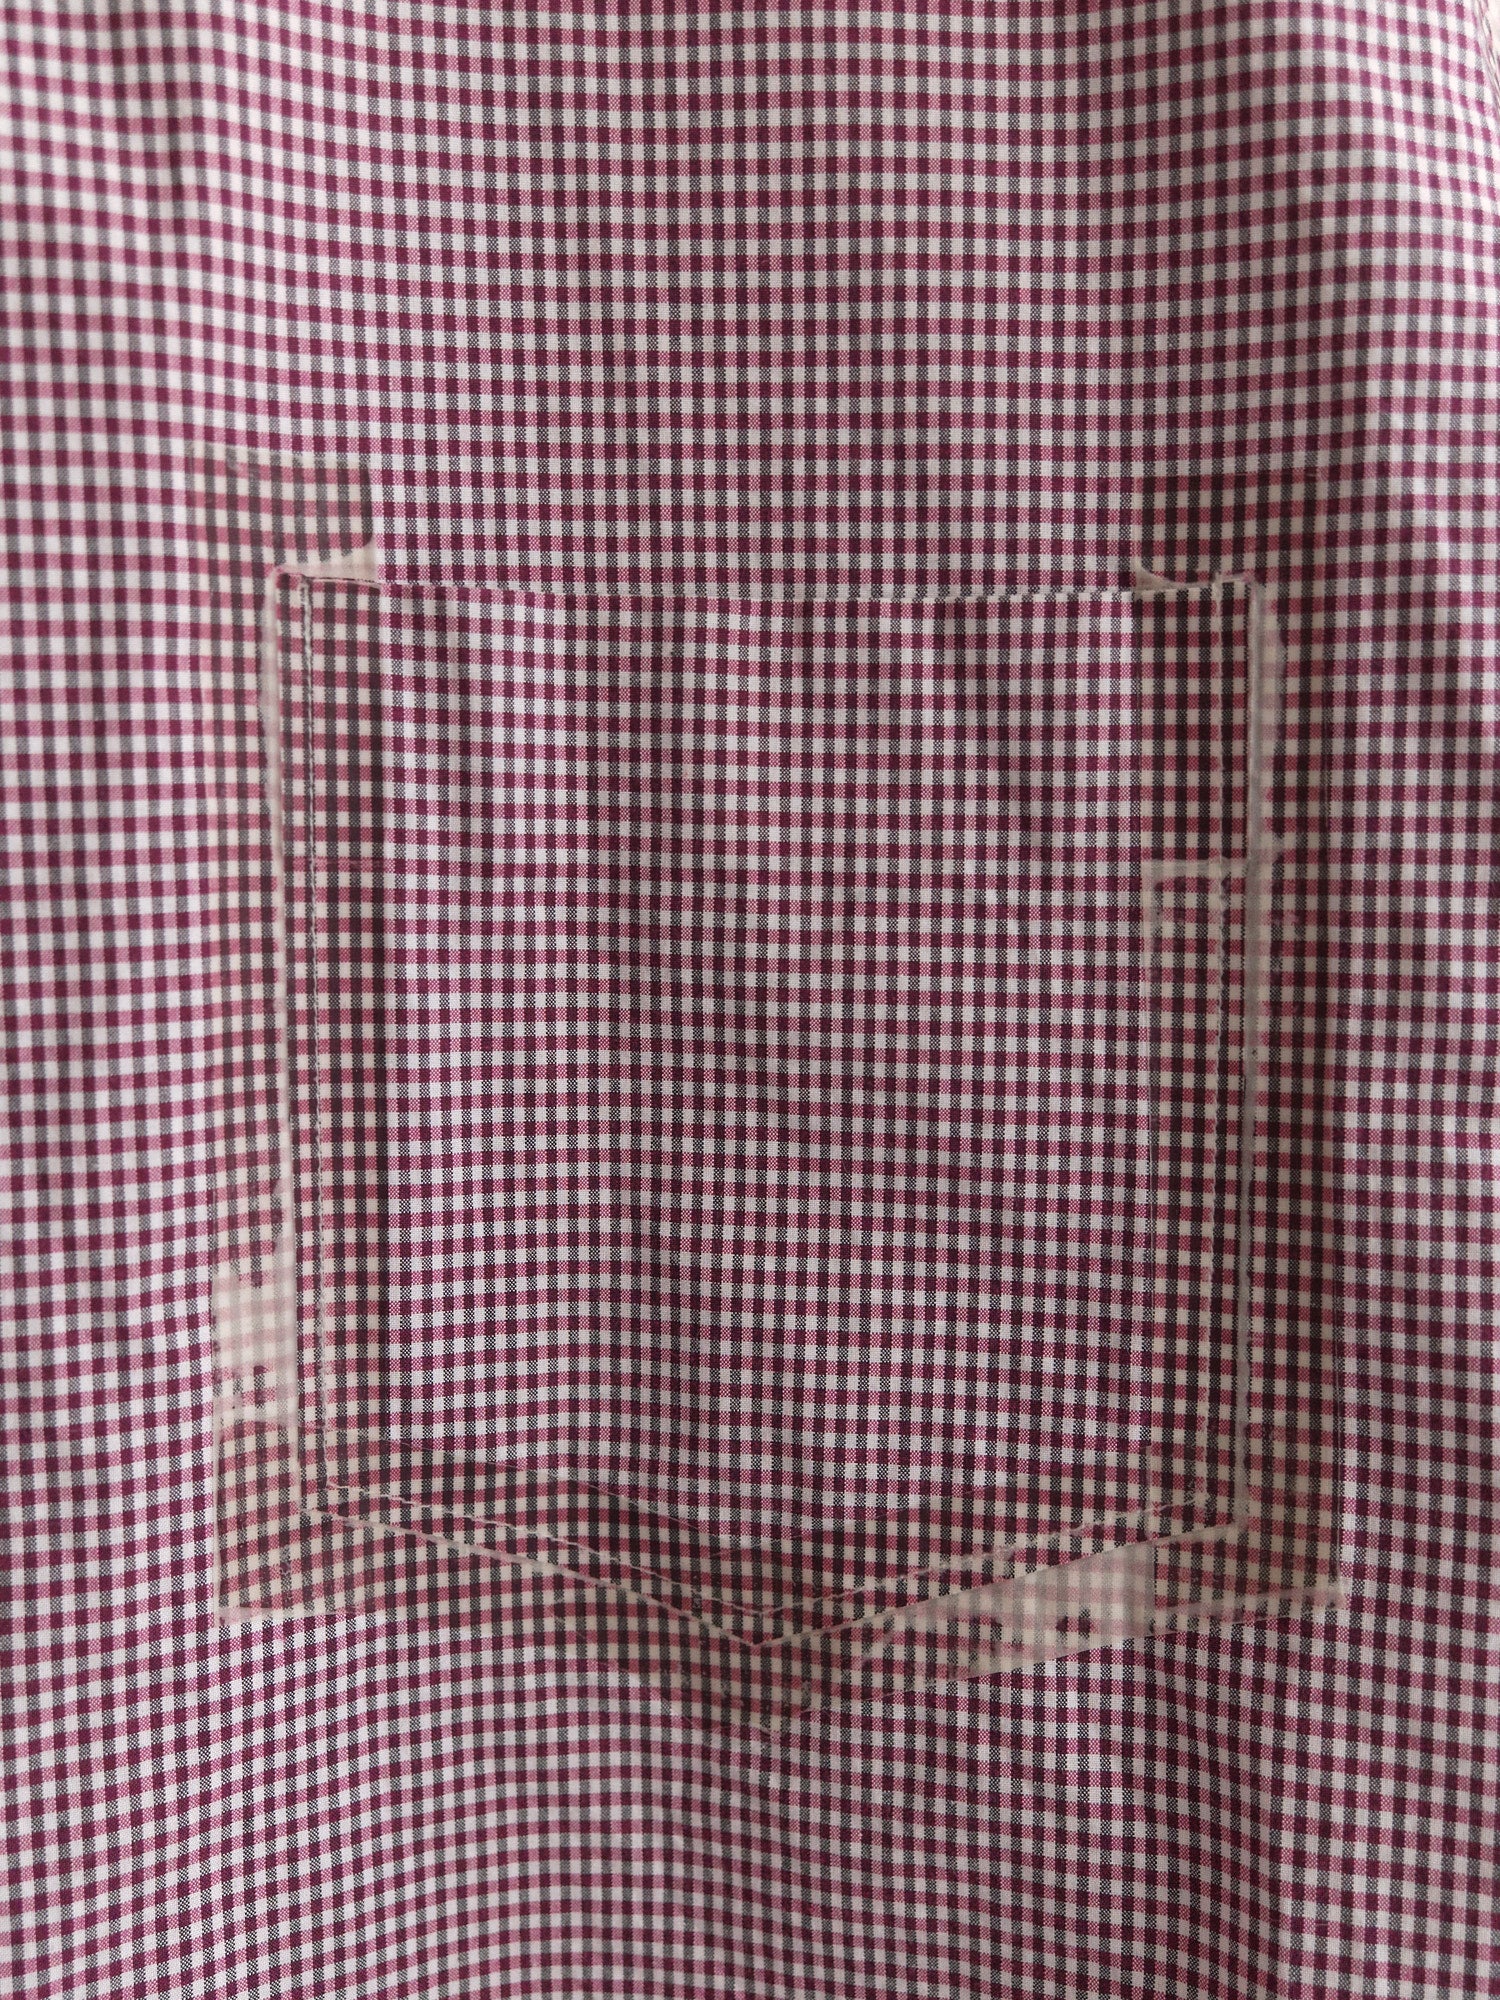 Comme des Garcons Homme 2003 purple white gingham taped seam shirt - size M